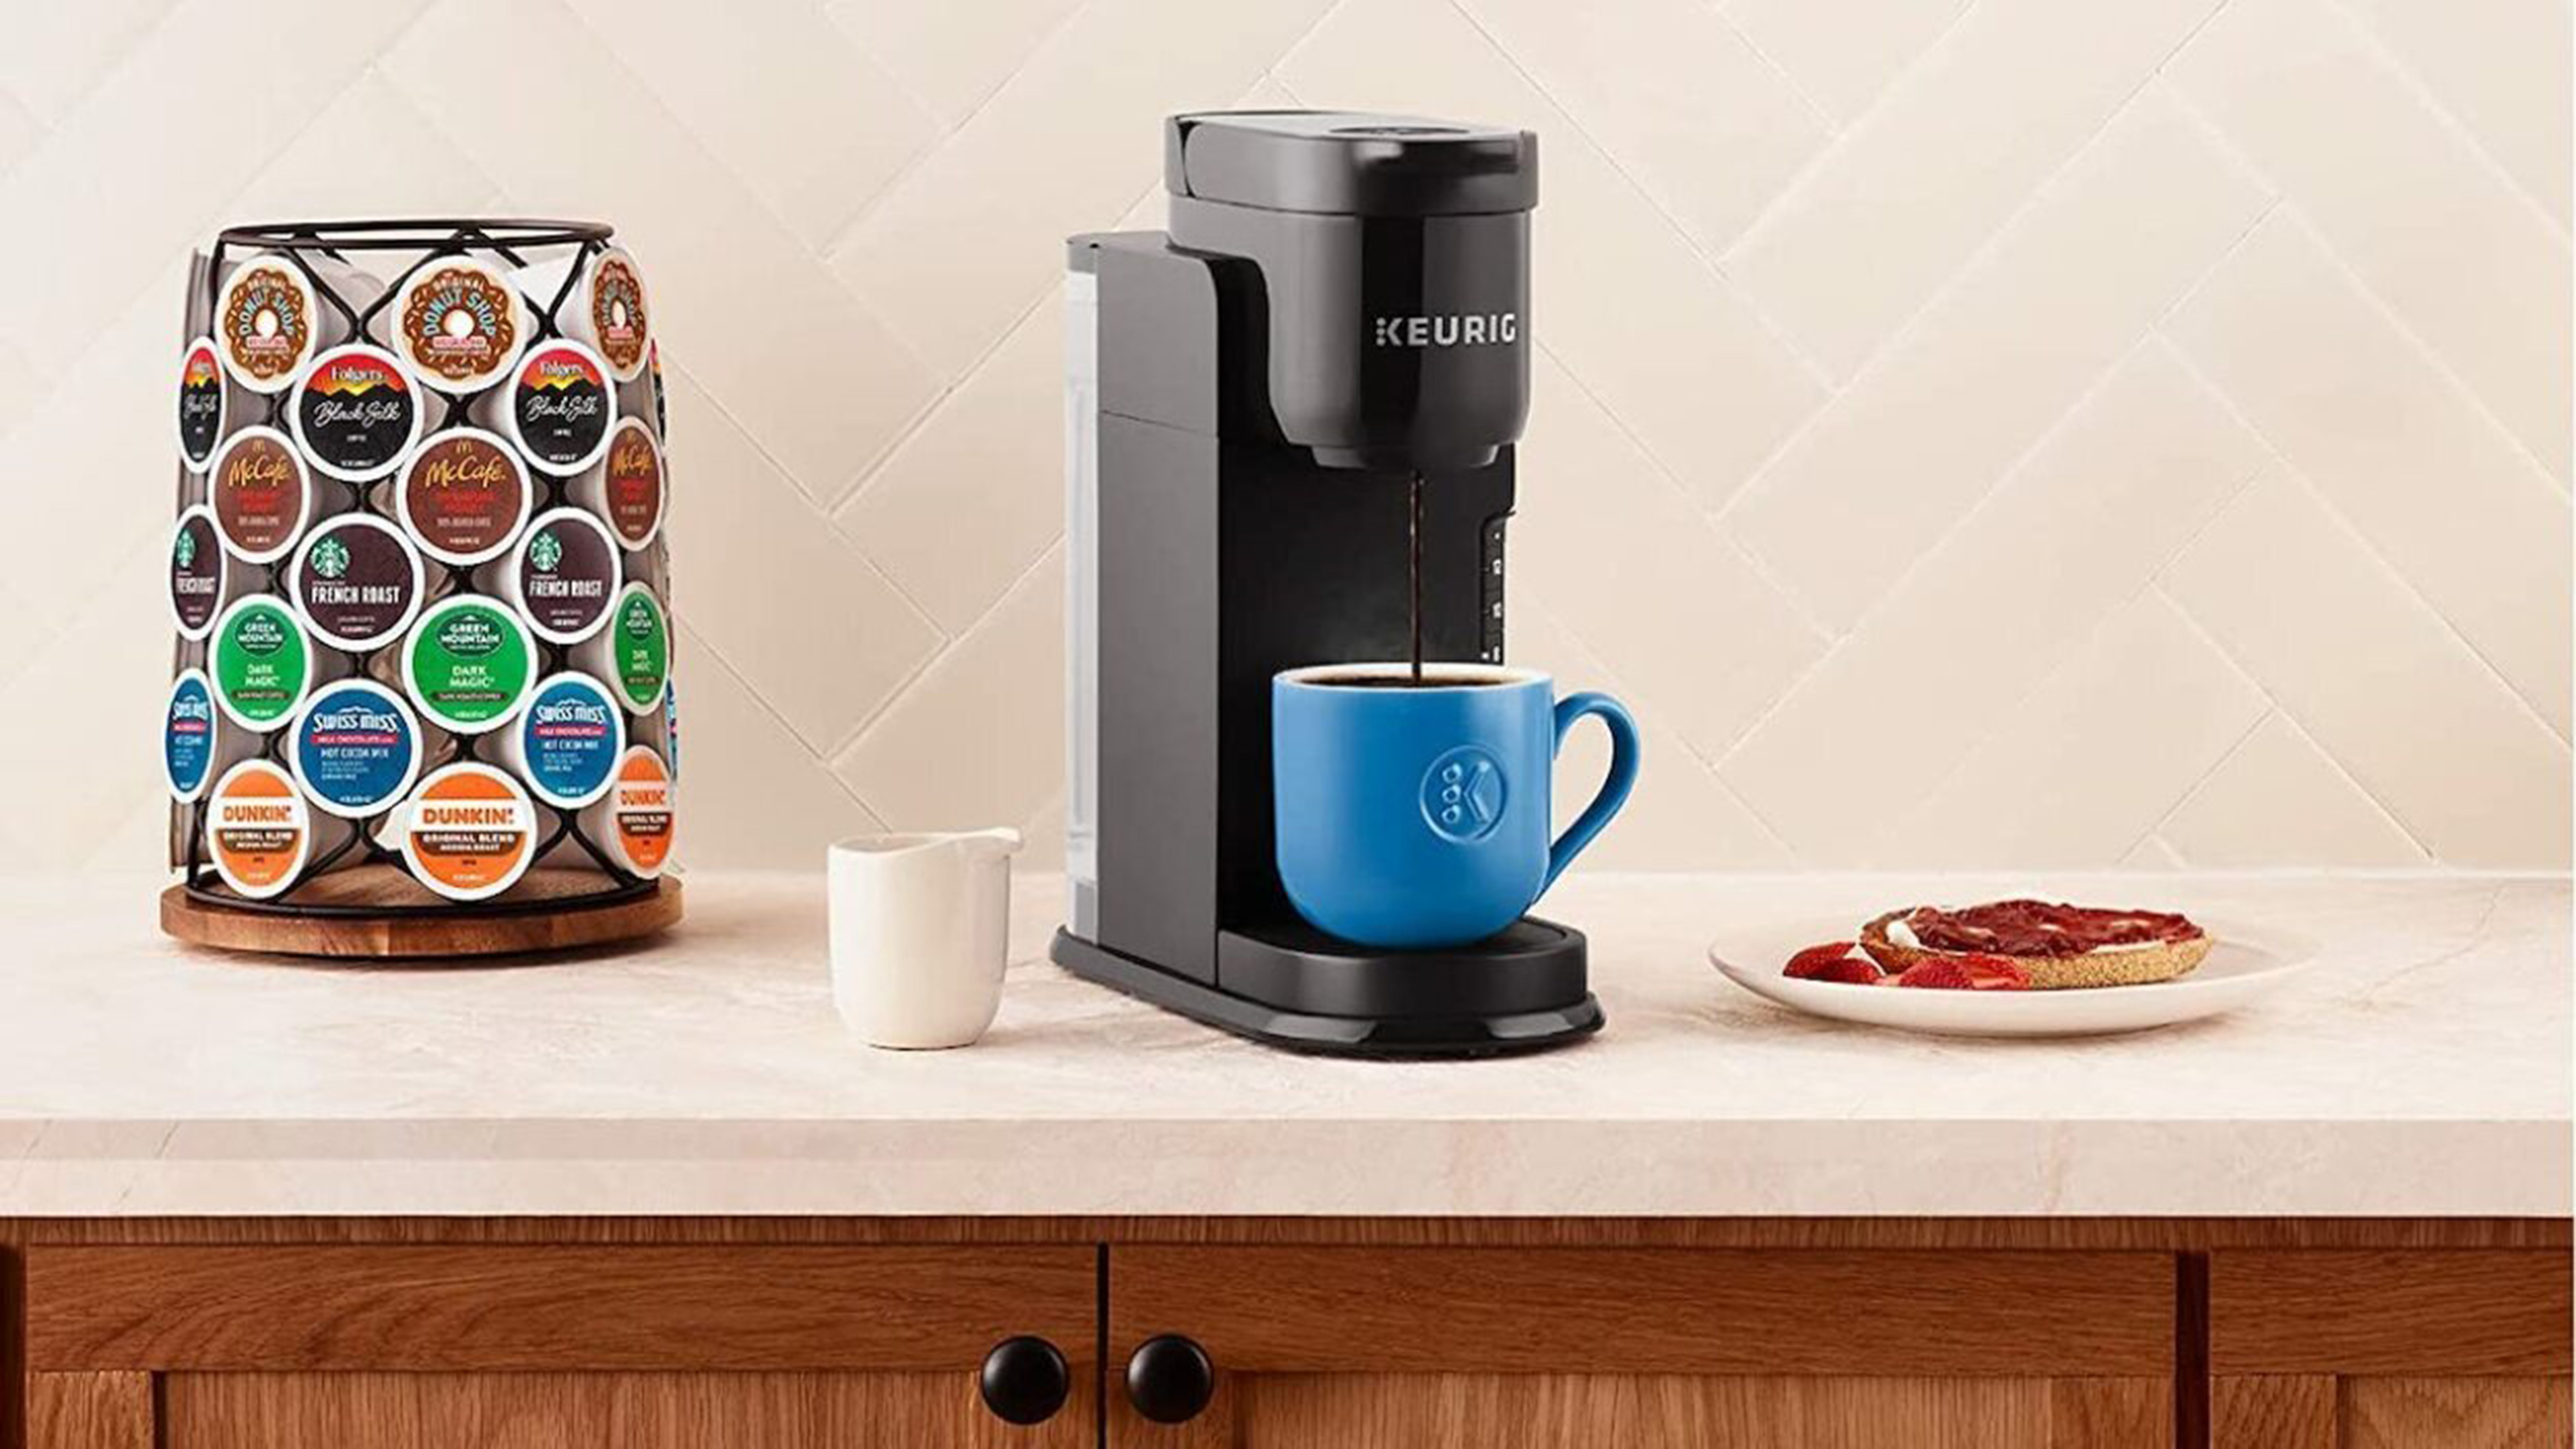 Keurig coffee makers are on sale at Walmart starting at $50